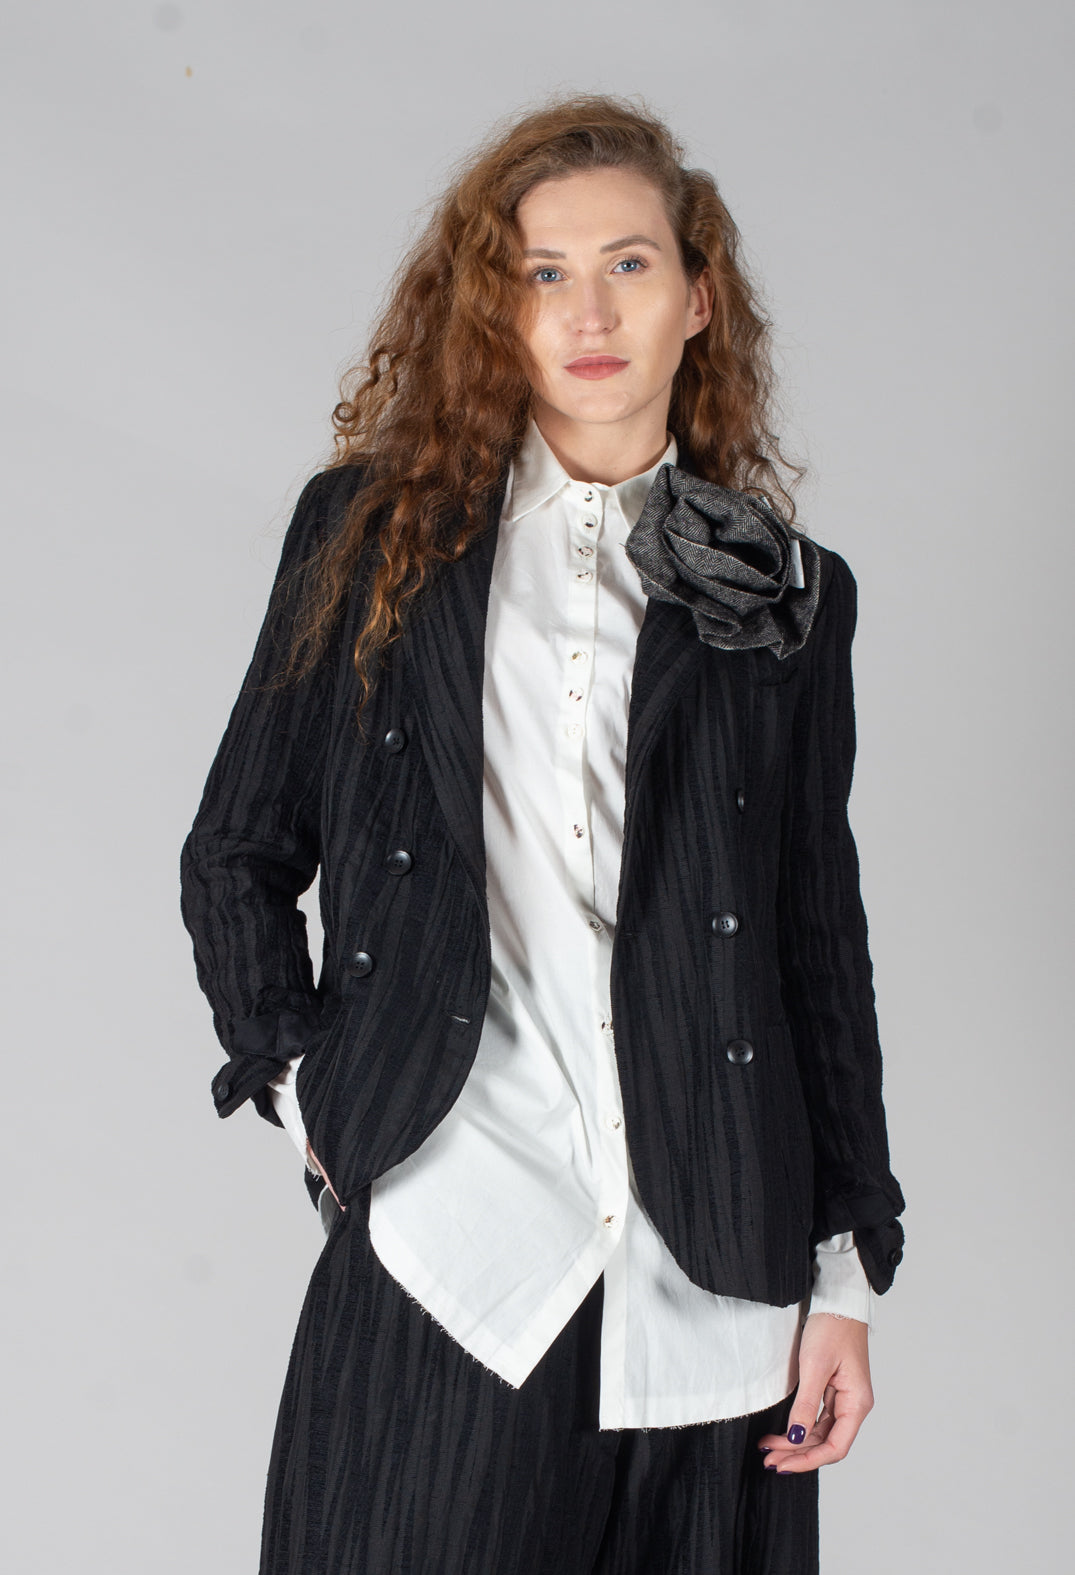 Textured Double Breasted Jacket in Black